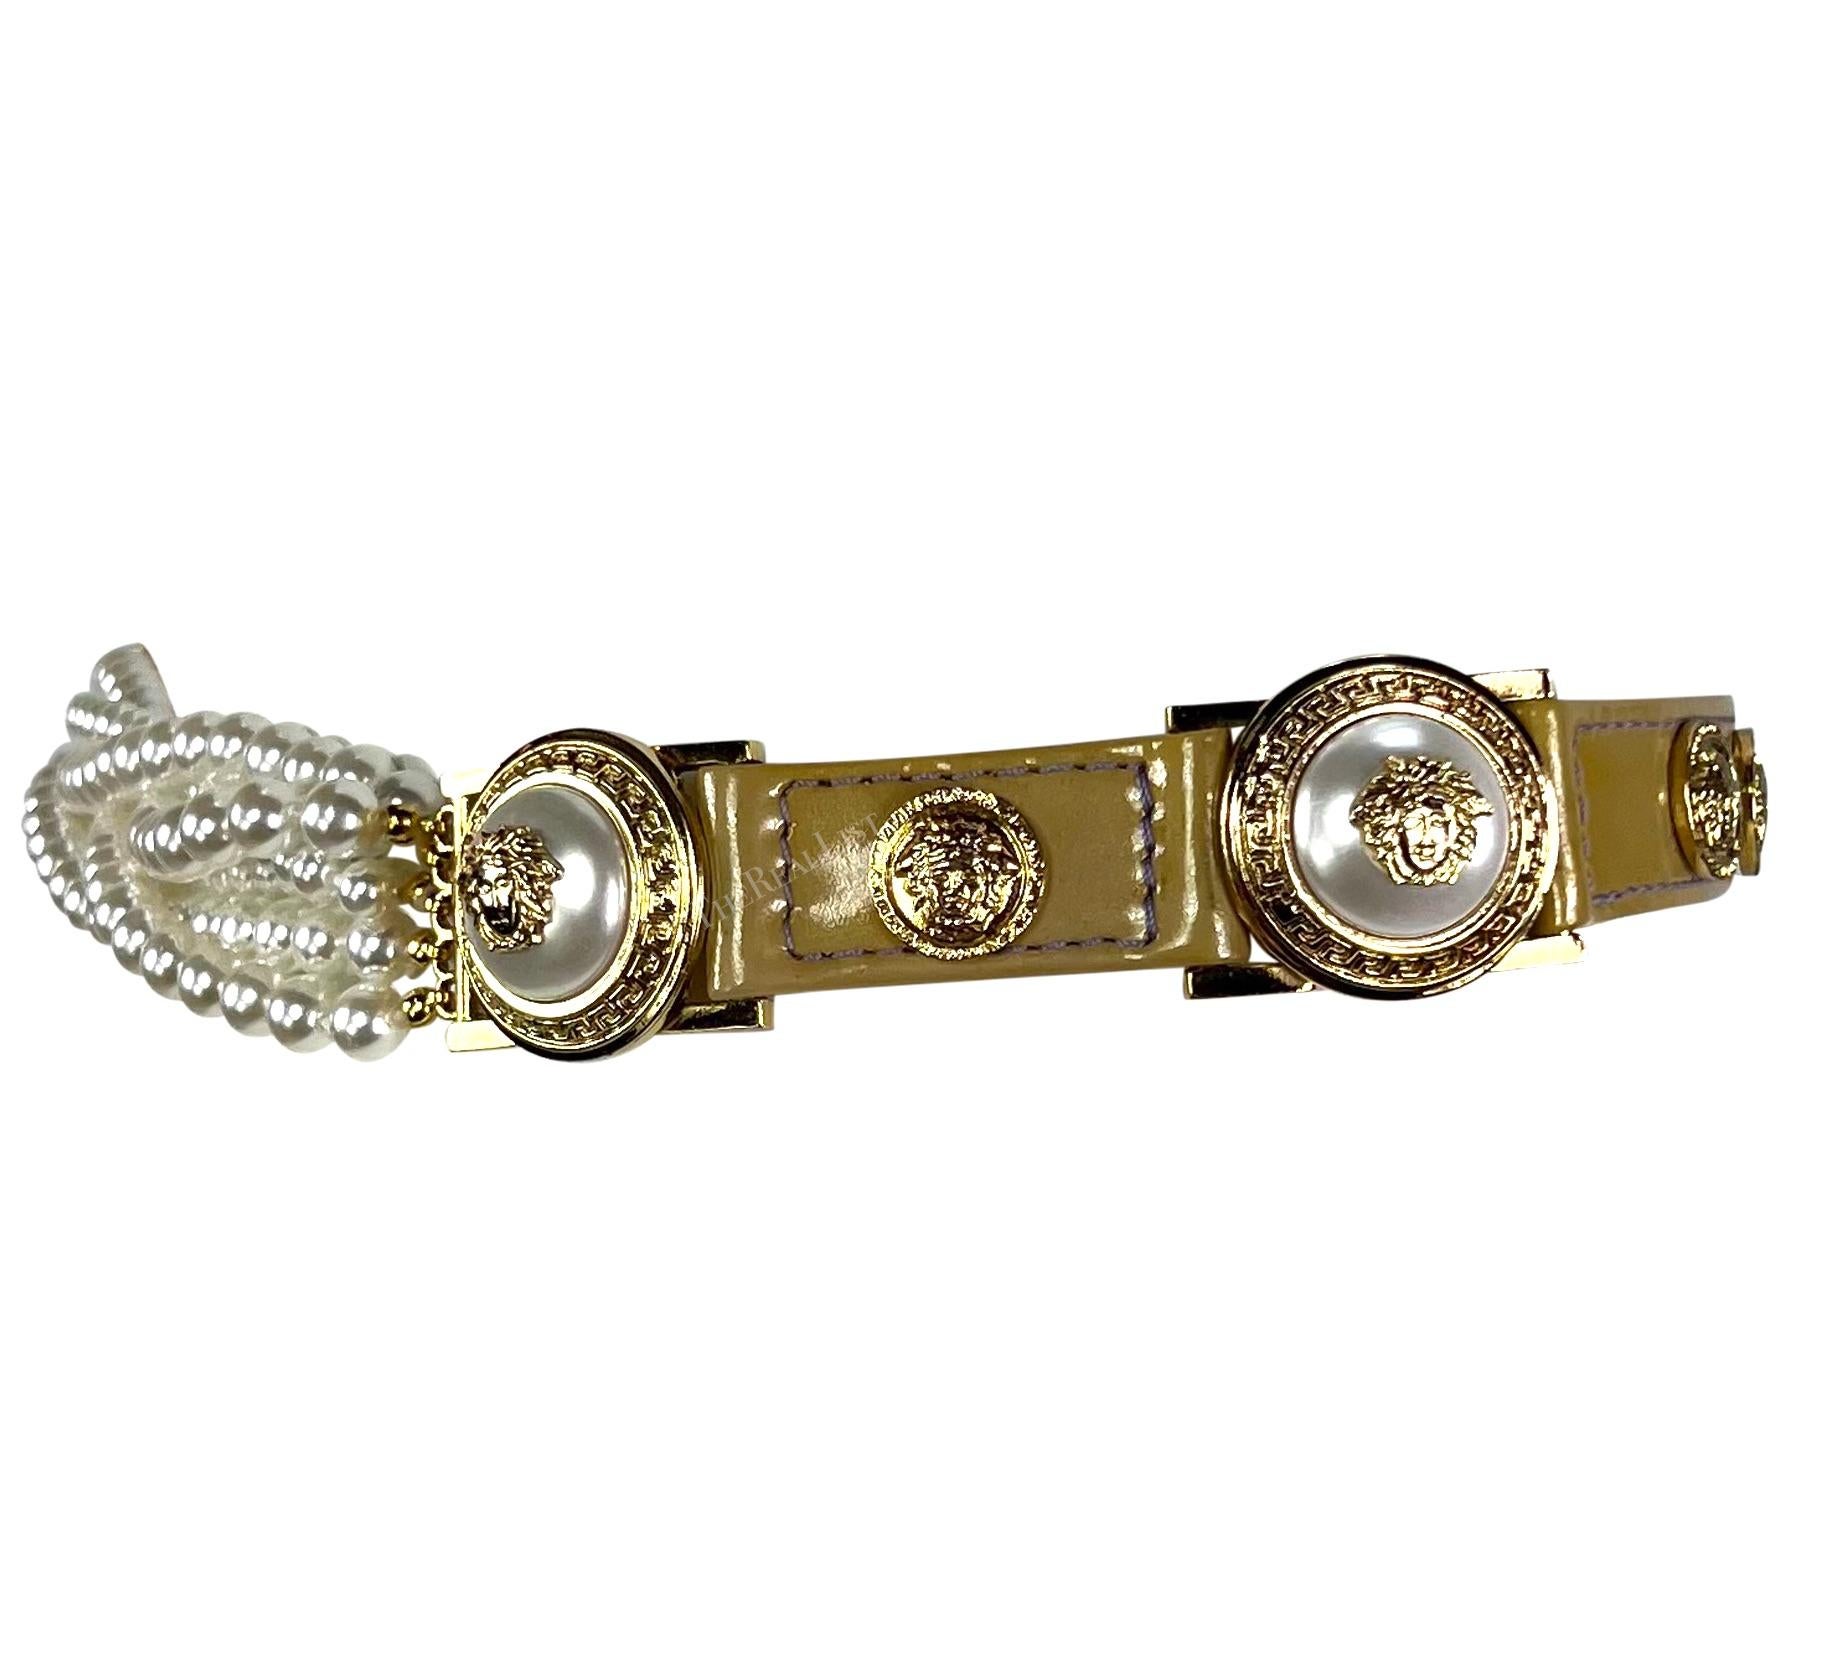 F/W 1994 Gianni Versace Medusa Faux Pearl Patent Leather Belt In Excellent Condition For Sale In West Hollywood, CA